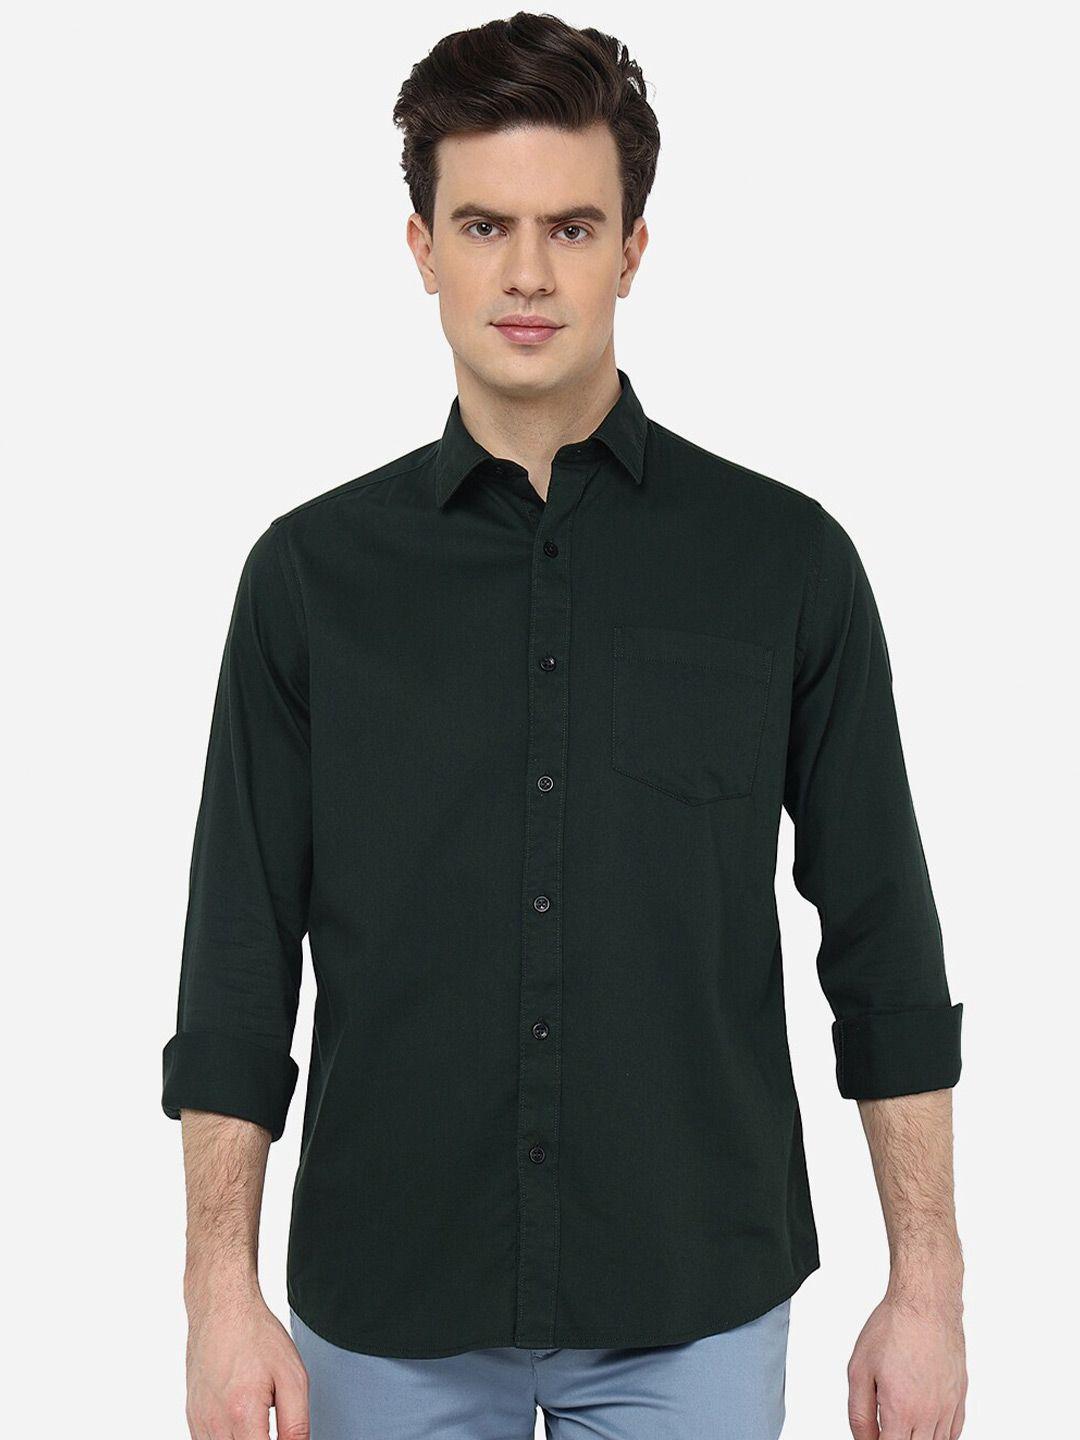 greenfibre-regular-fit-spread-collar-pure-cotton-casual-shirt